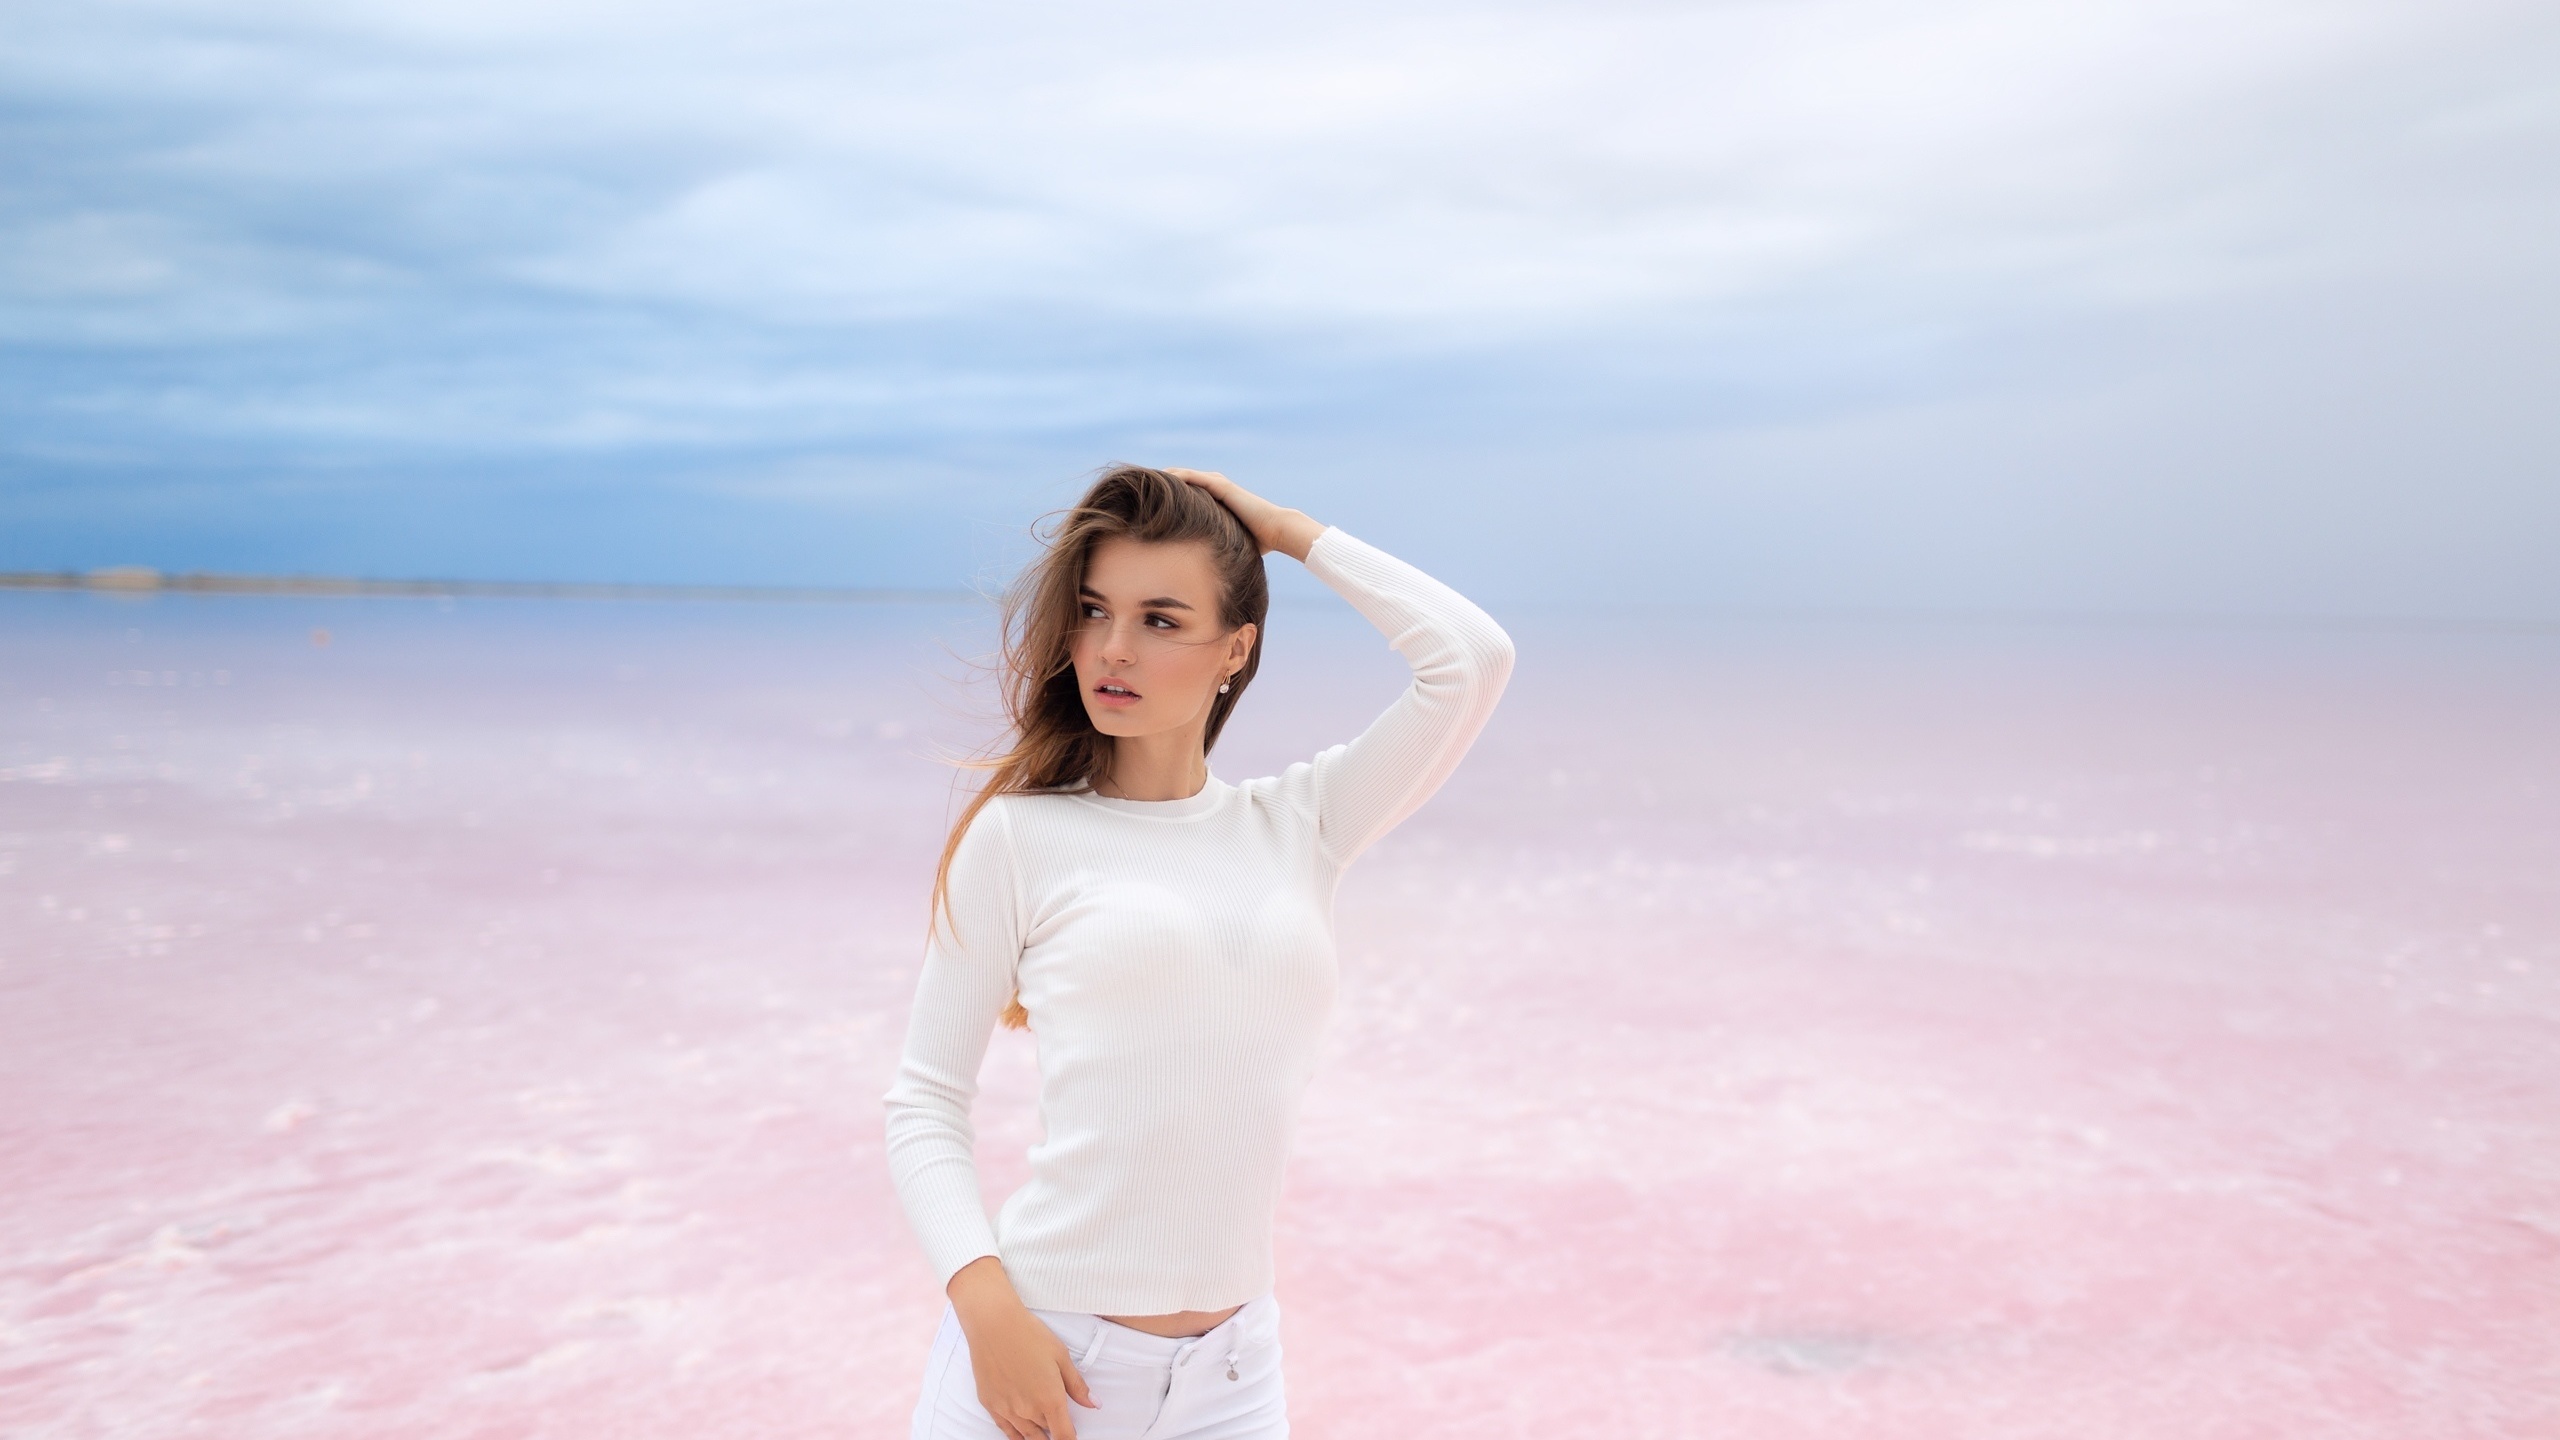 women, vitaly skitaev, white clothing, jeans, sky, clouds, women outdoors, water, looking away